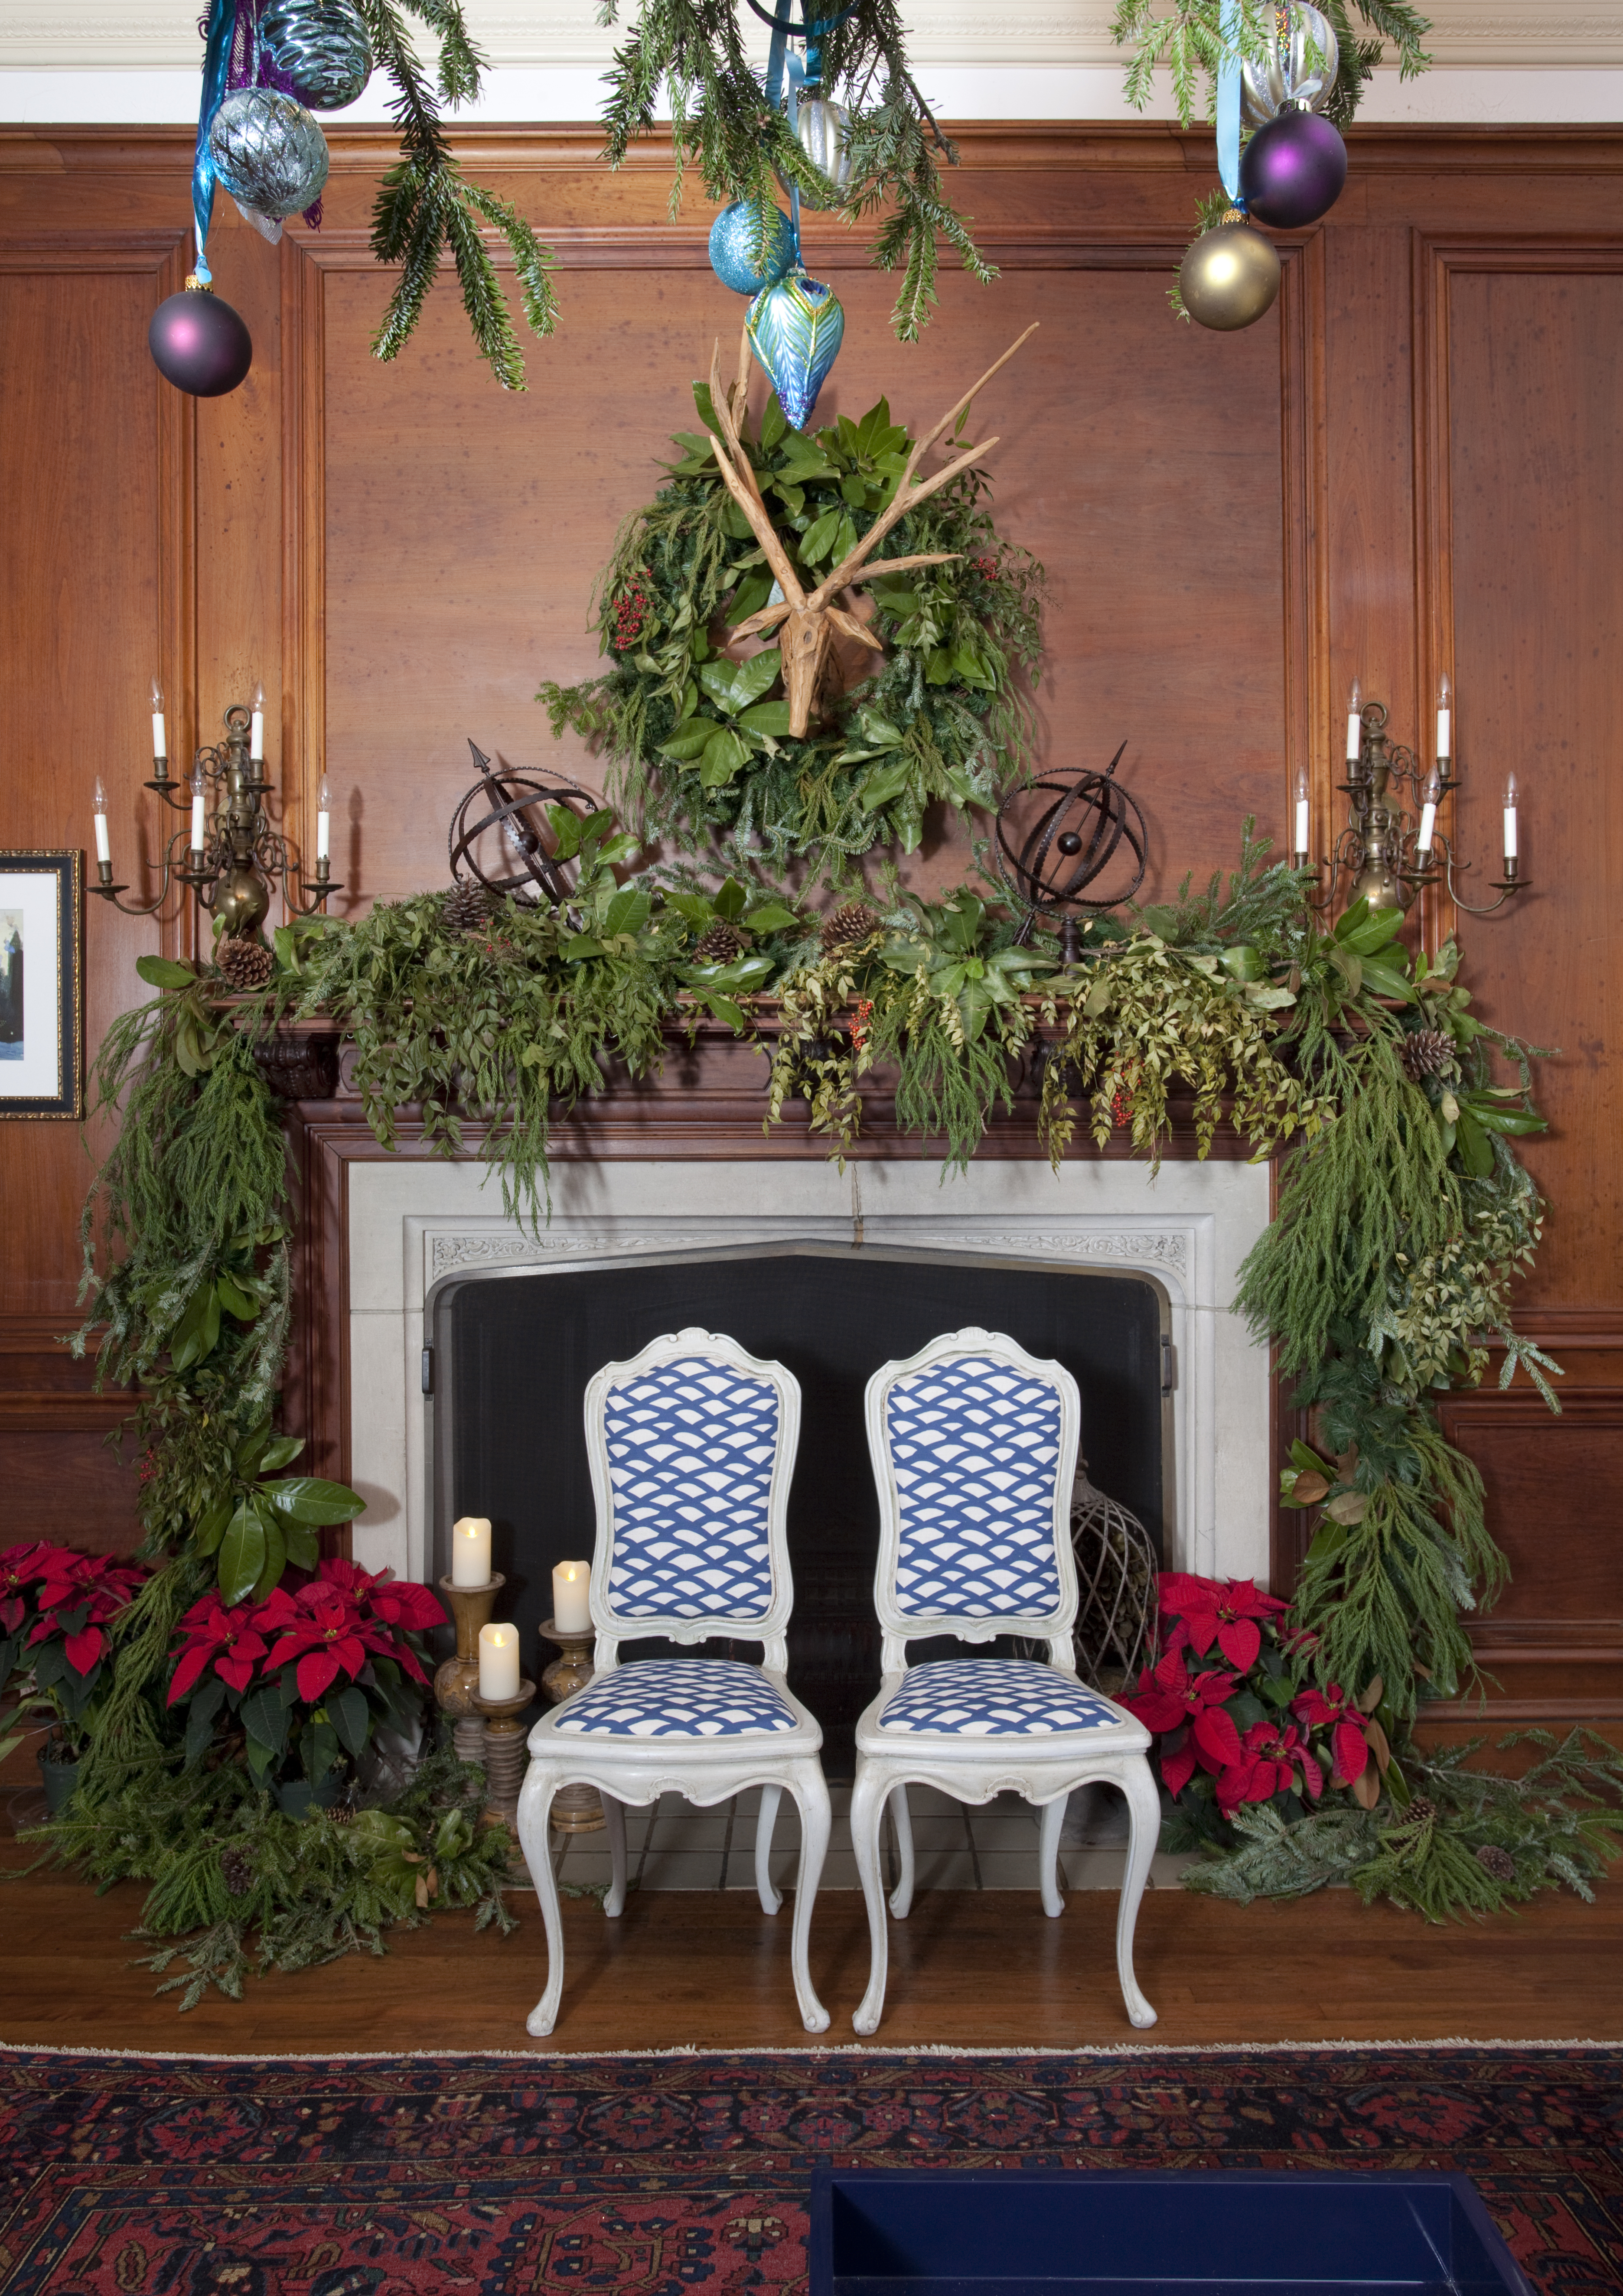 HOLIDAY DECORATING: 5 DESIGN TIPS FOR YOUR MANTEL-Rooms Revamped Interior Design